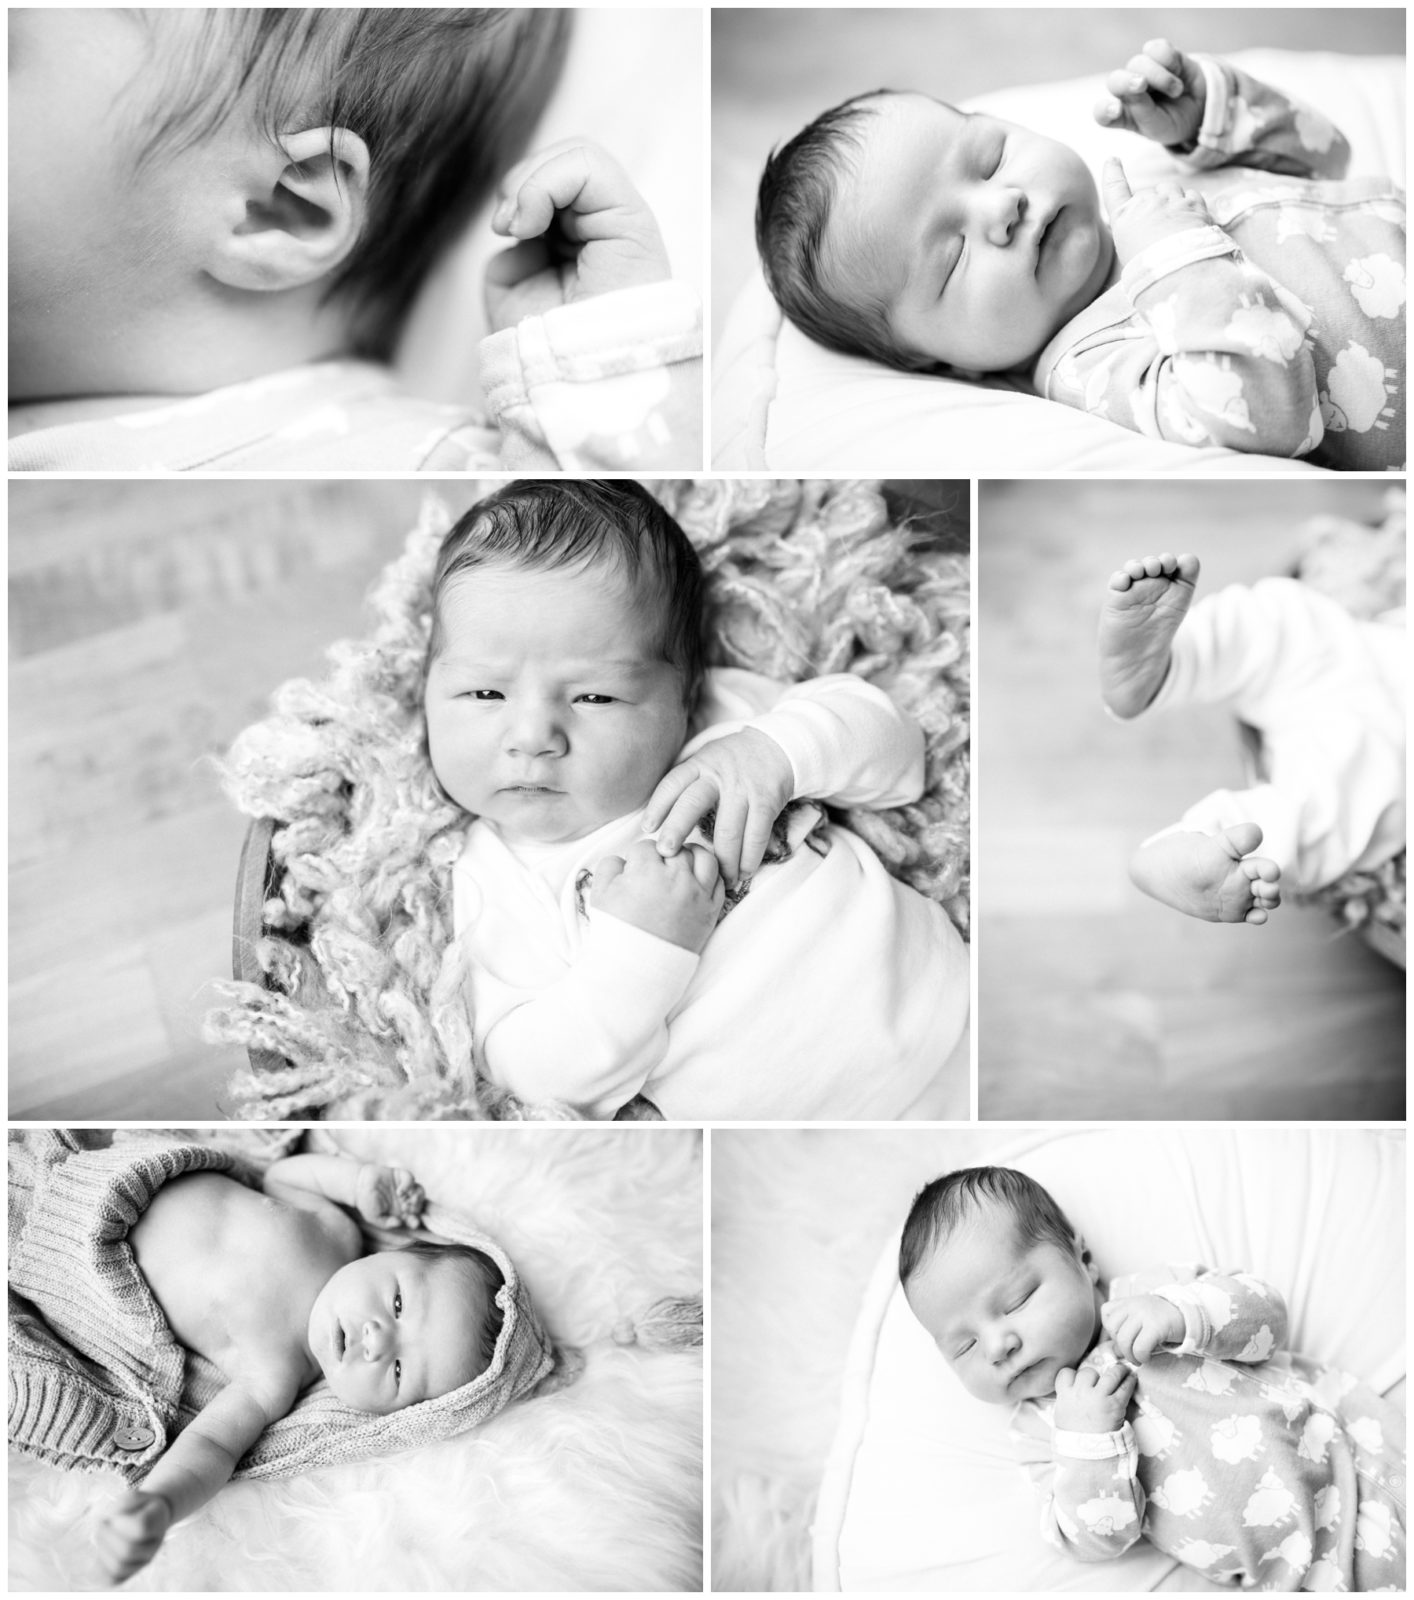 Composition of photos with newborn baby.